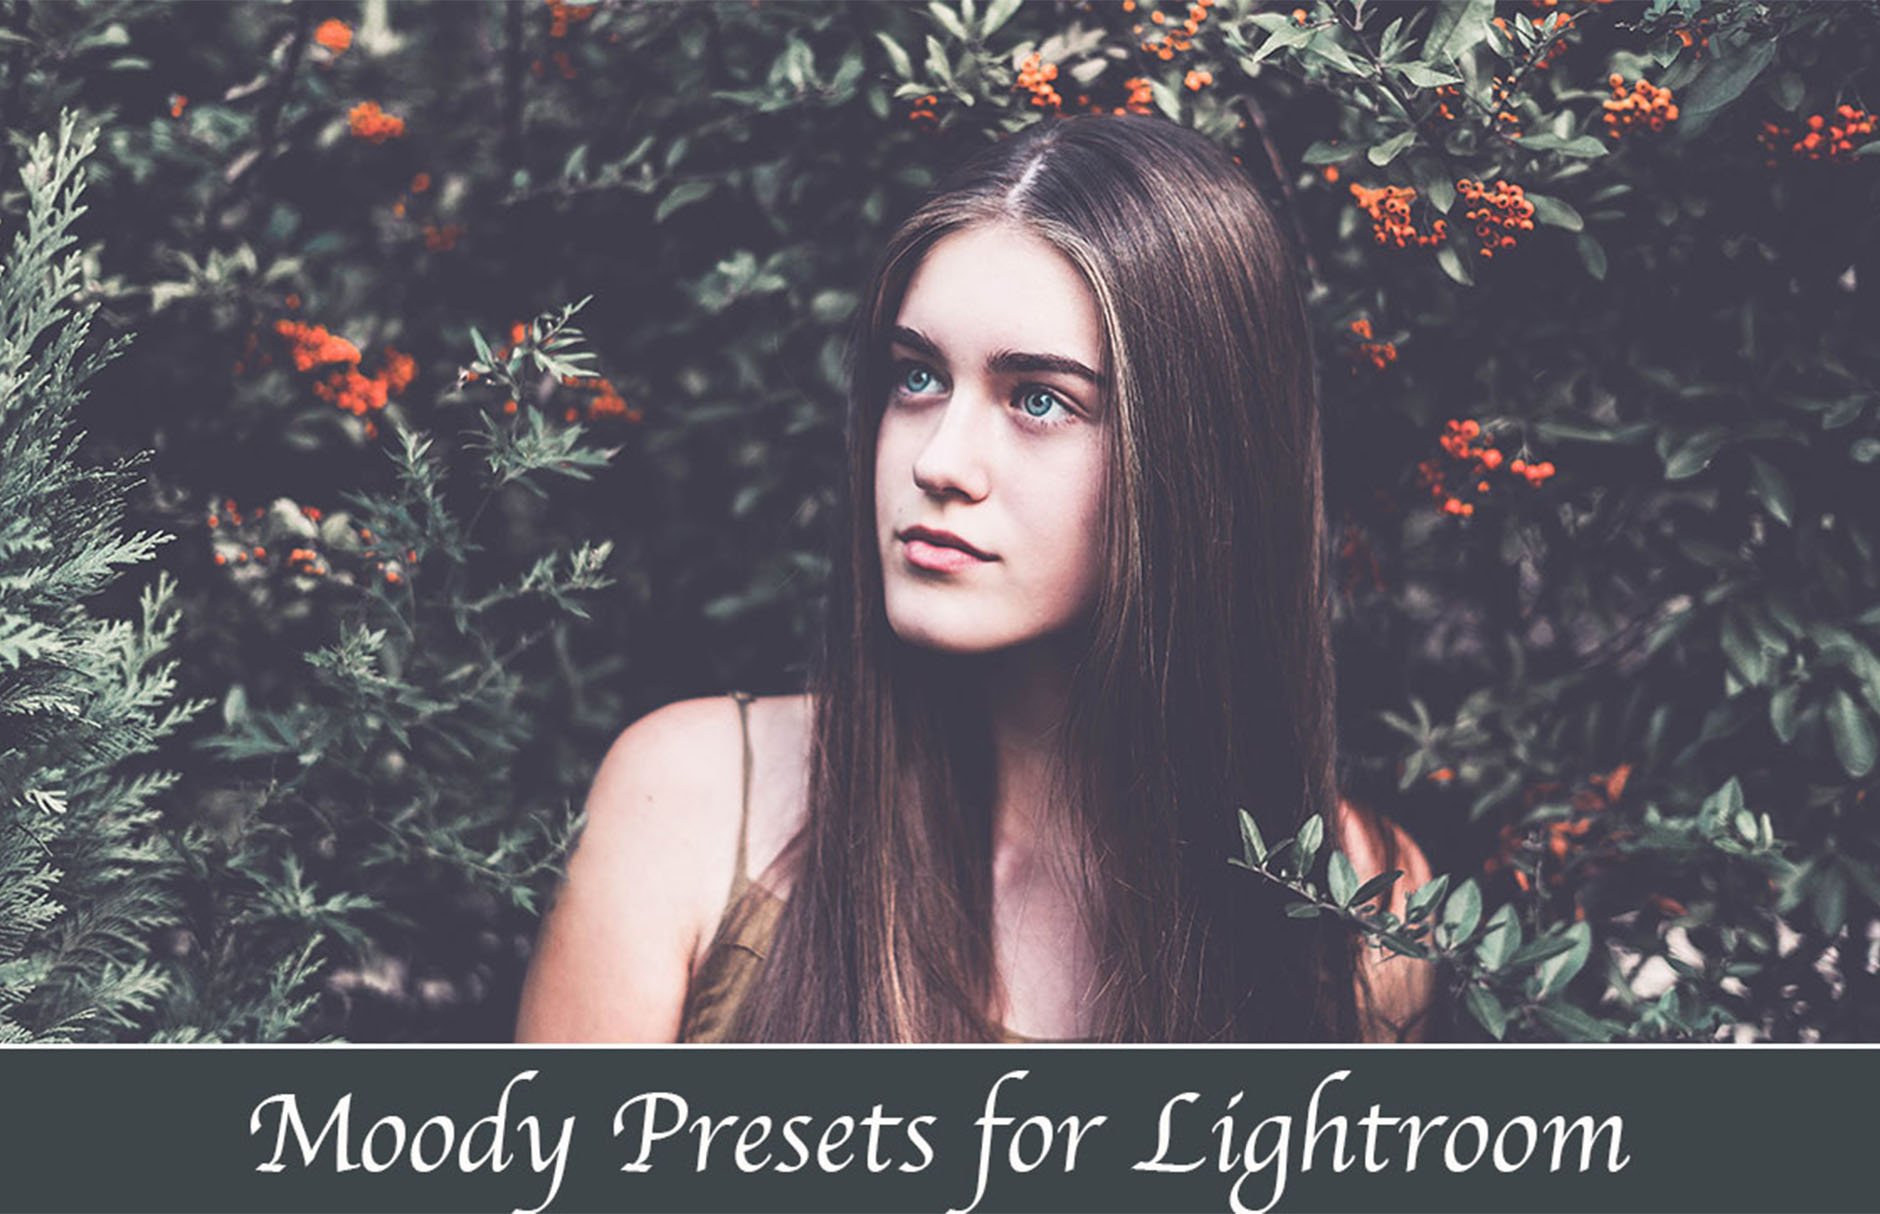 50 Moody Presets for Lightroomcover image.